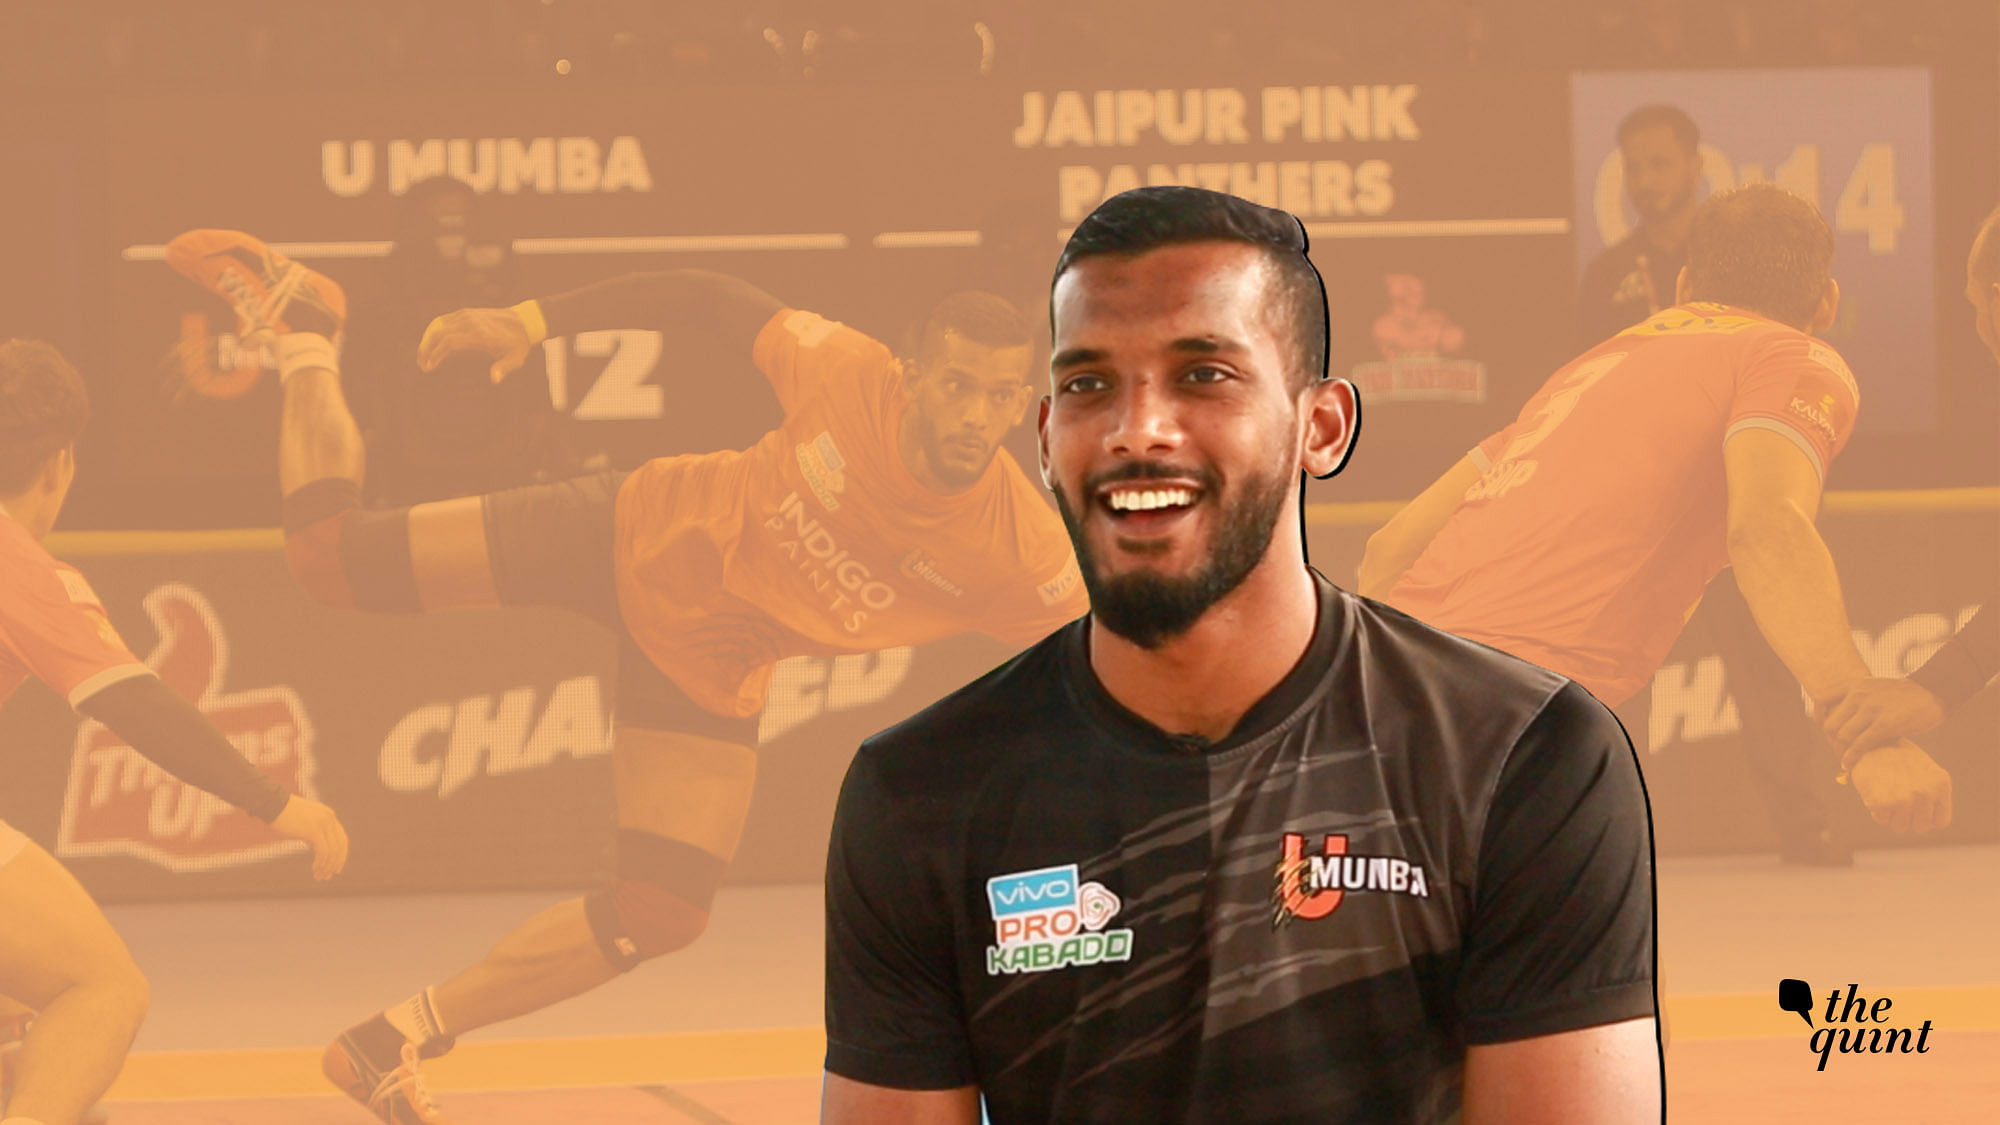 On the opening day of this year’s Pro Kabaddi League, Siddharth Desai made his debut after a long wait.